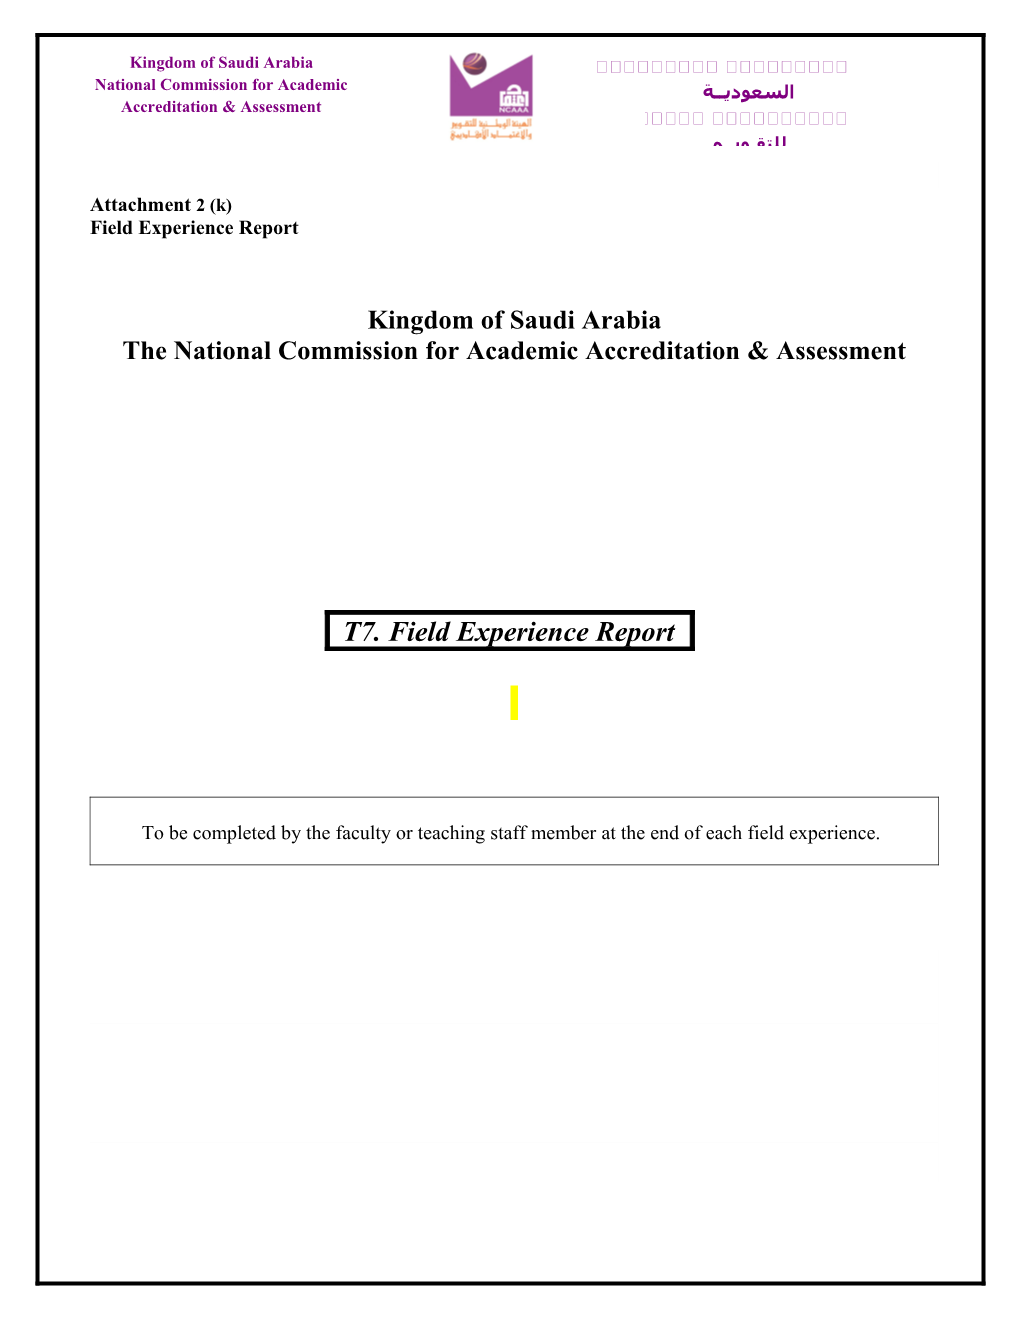 The National Commission for Academic Accreditation & Assessment s8